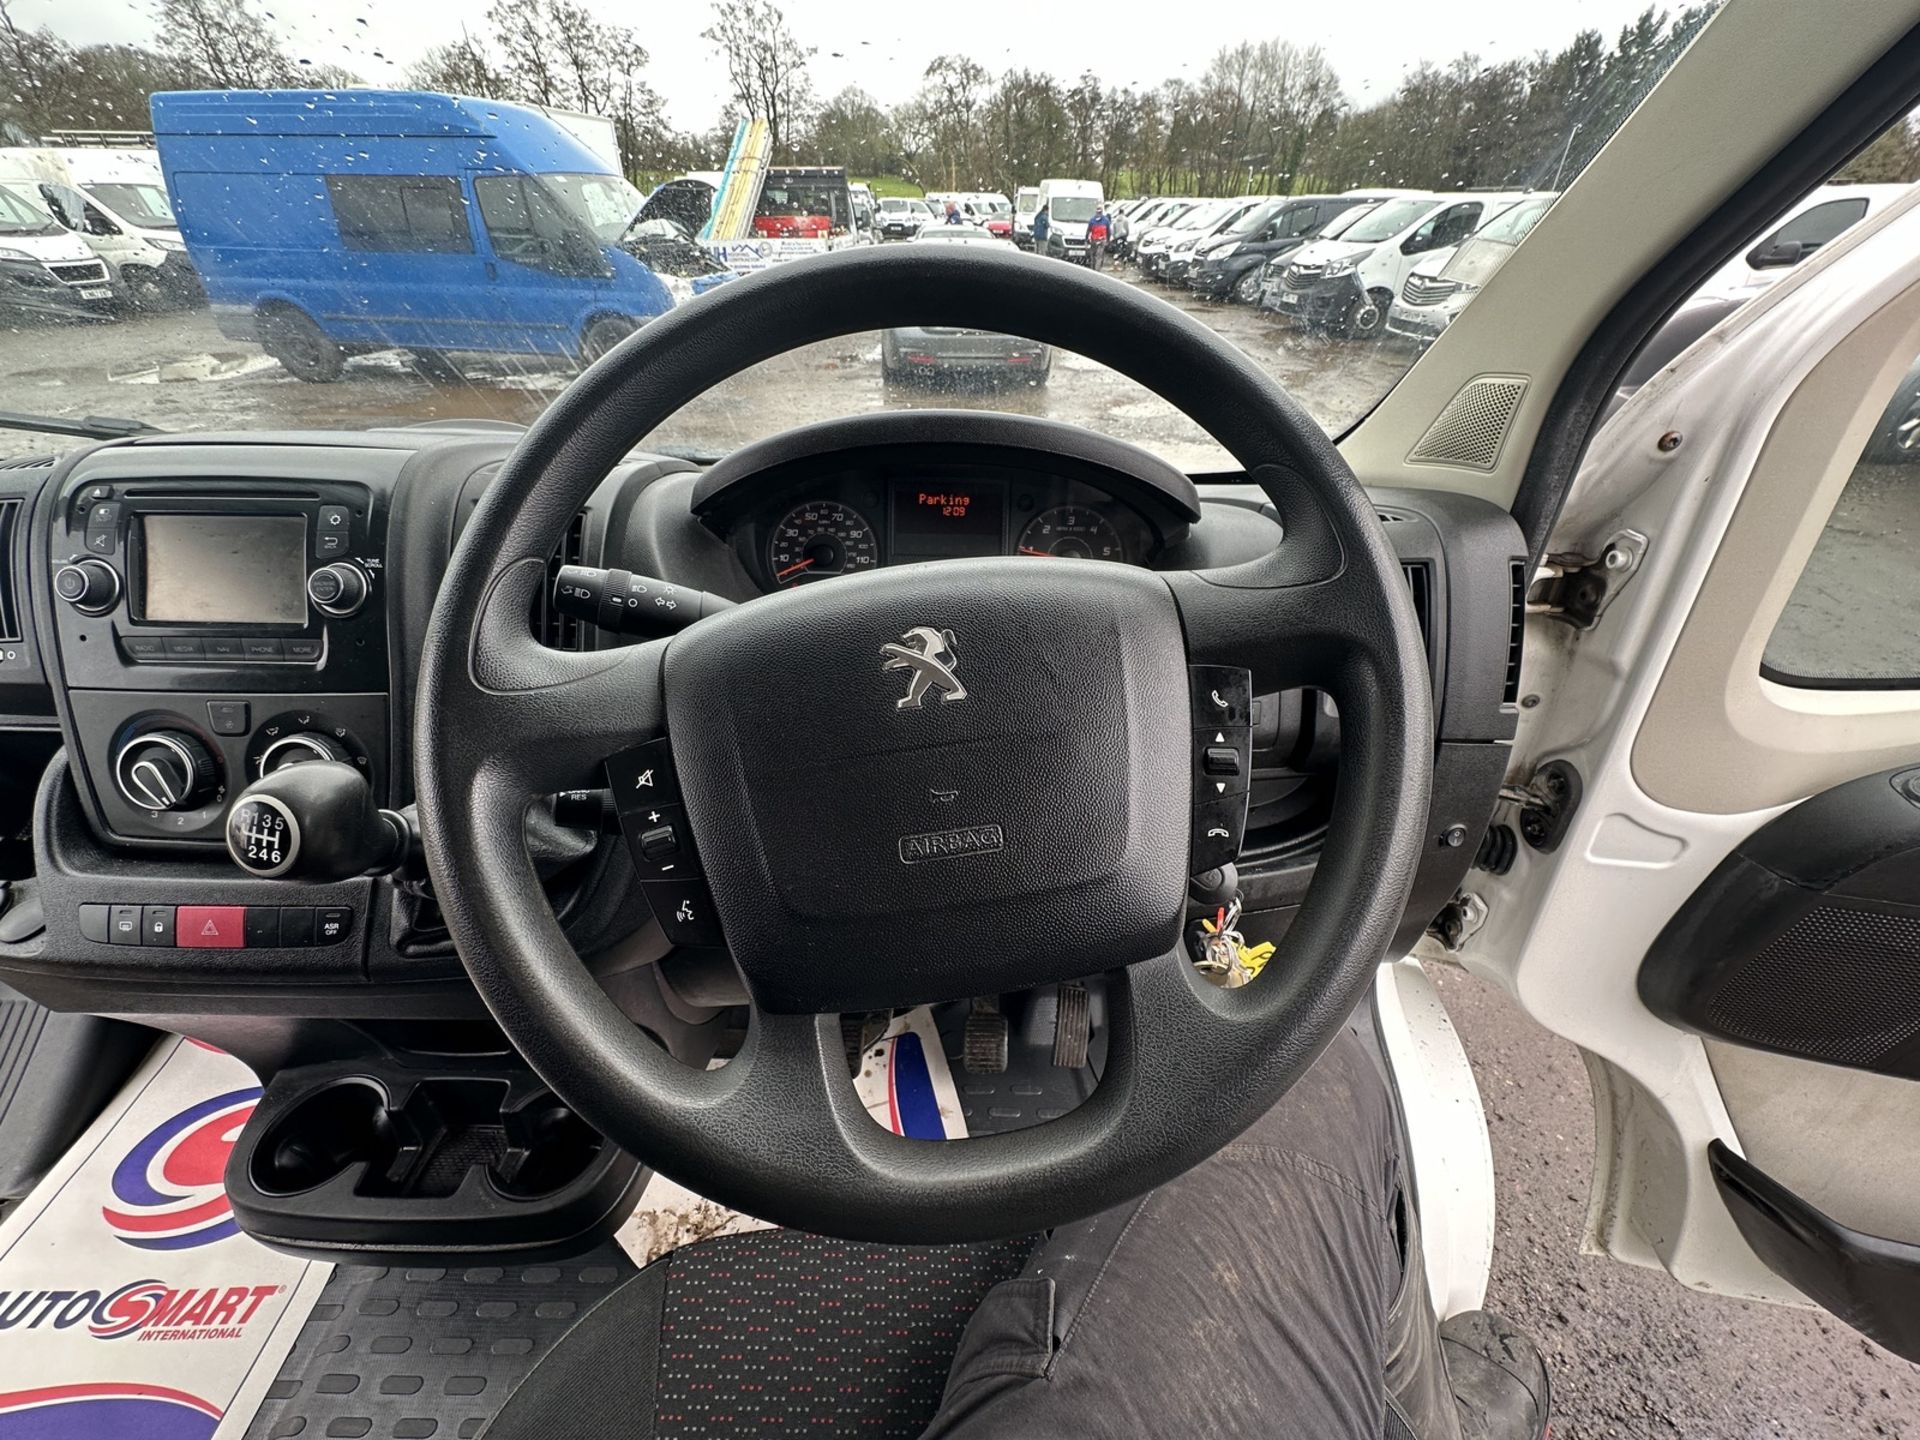 WHITE WORKHORSE: 2019 PANEL VAN, READY FOR DUTY - Image 17 of 18